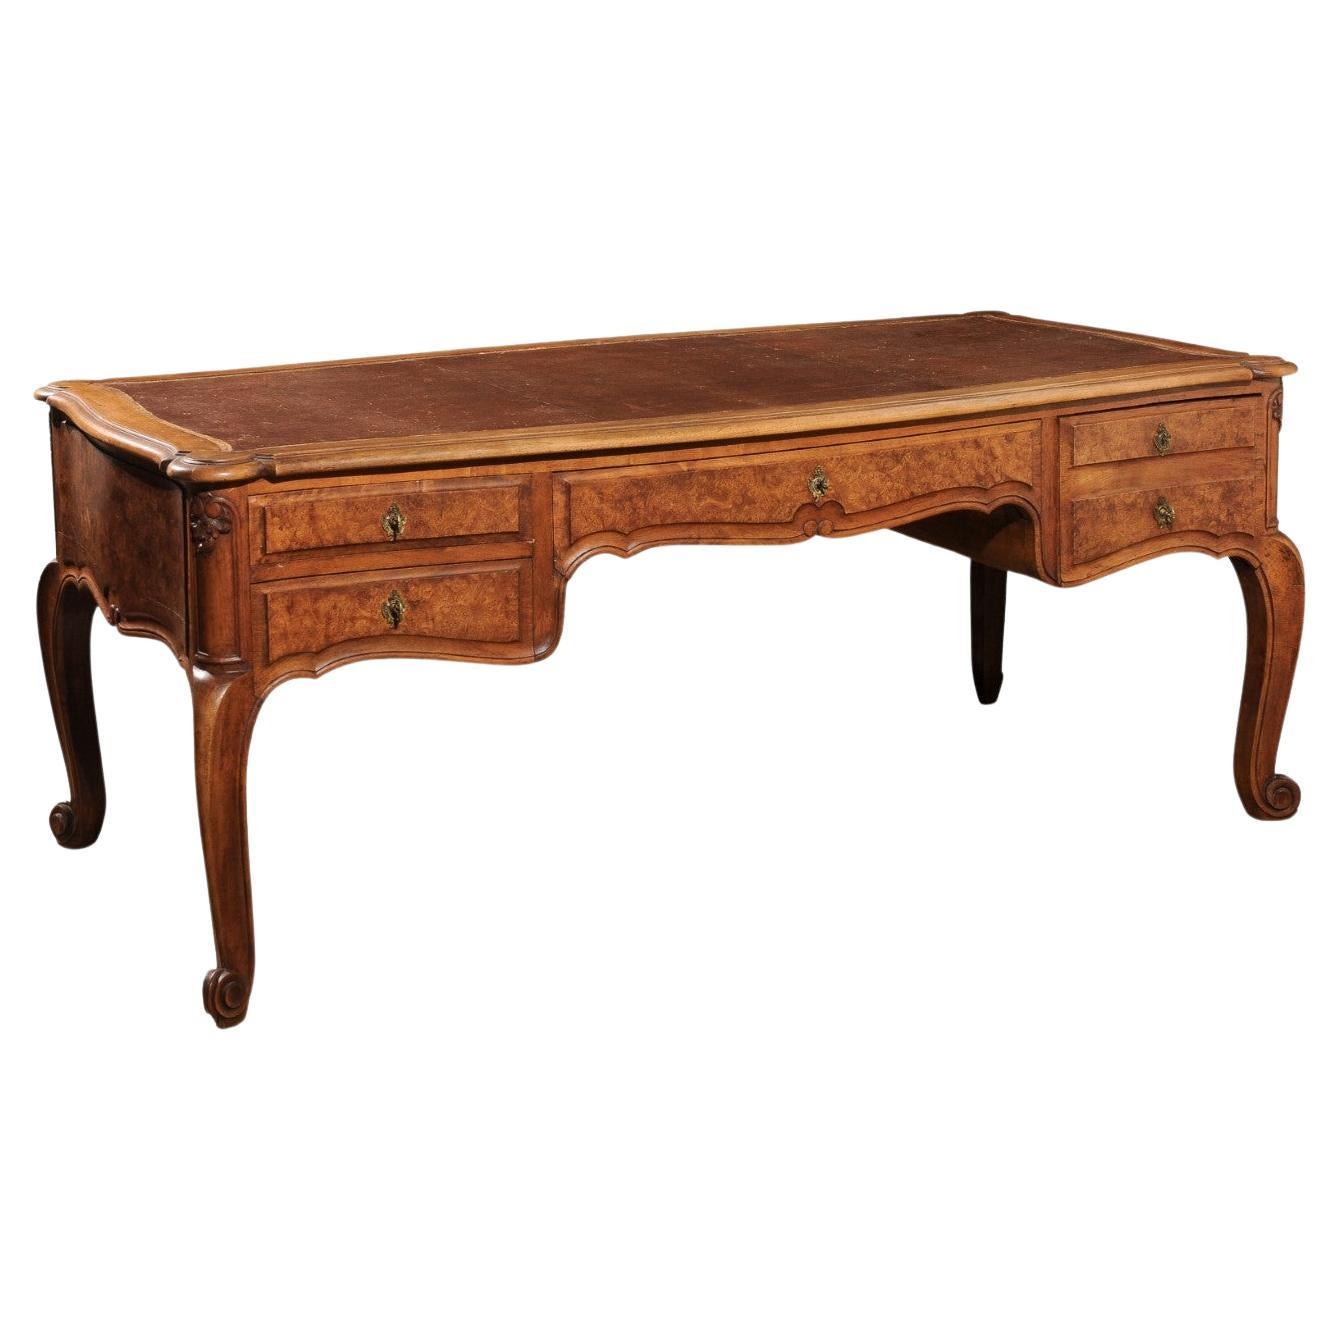 French Louis XV Style 19th Century Burr Walnut and Leather Top Four-Drawer Desk For Sale